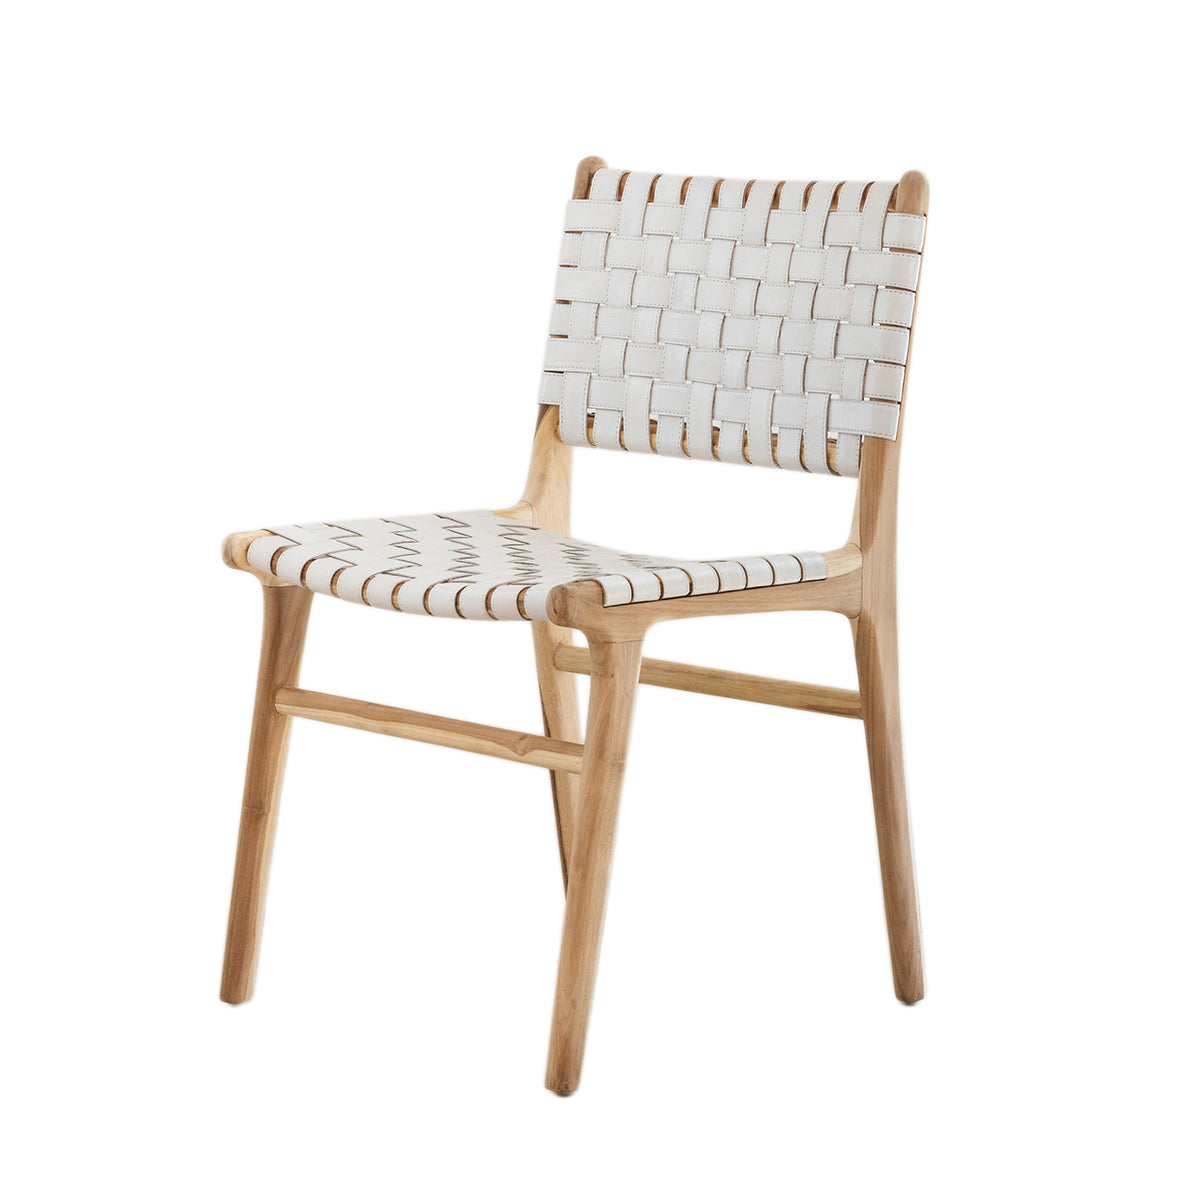 Bali Statement Dining Chair - White Leather